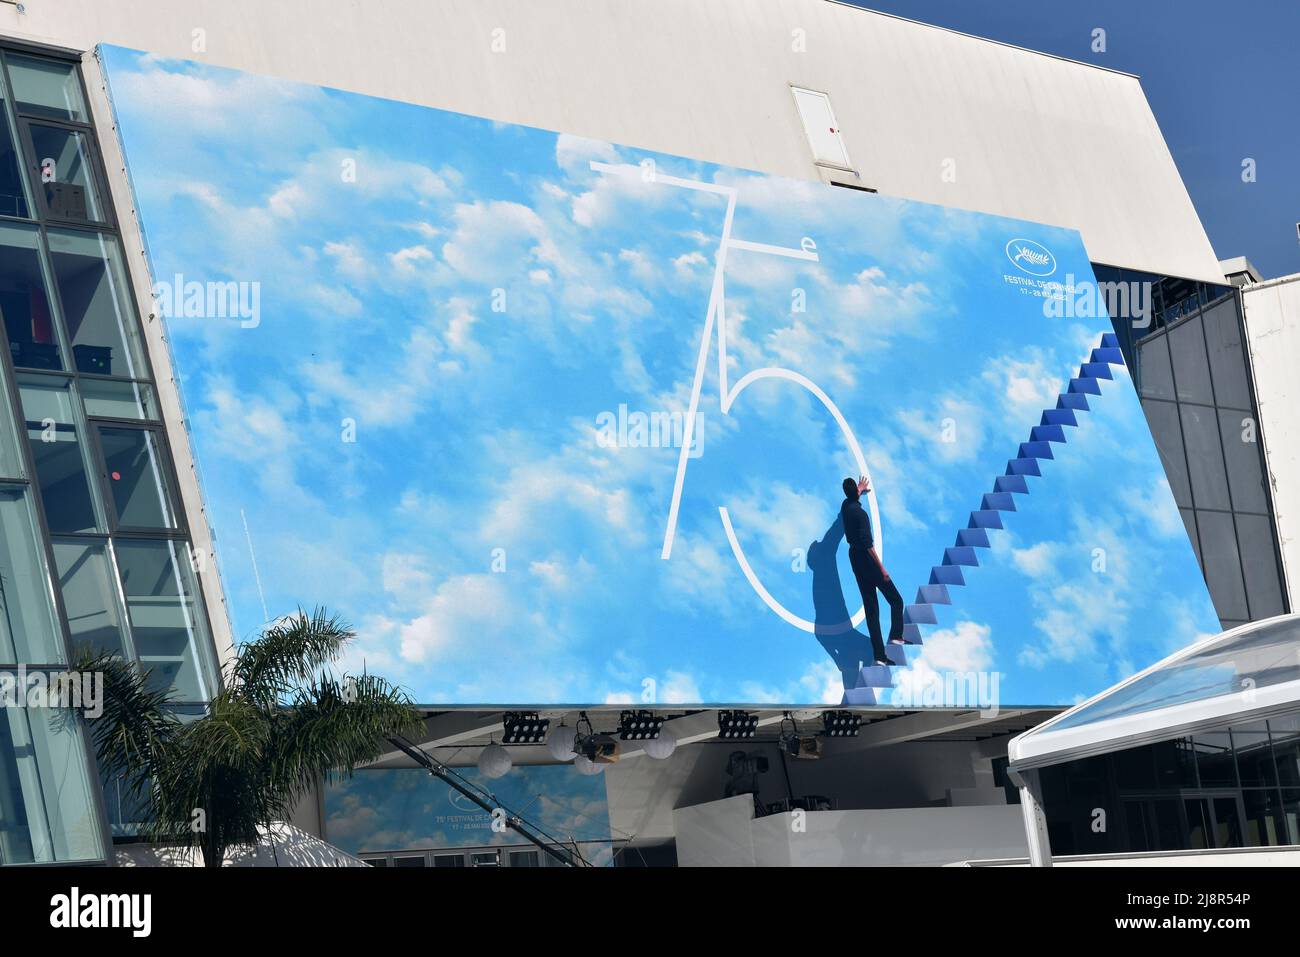 France, Cannes, the official poster for the 75th International Film Festival. This year the subject is an image of the film Truman show. Stock Photo